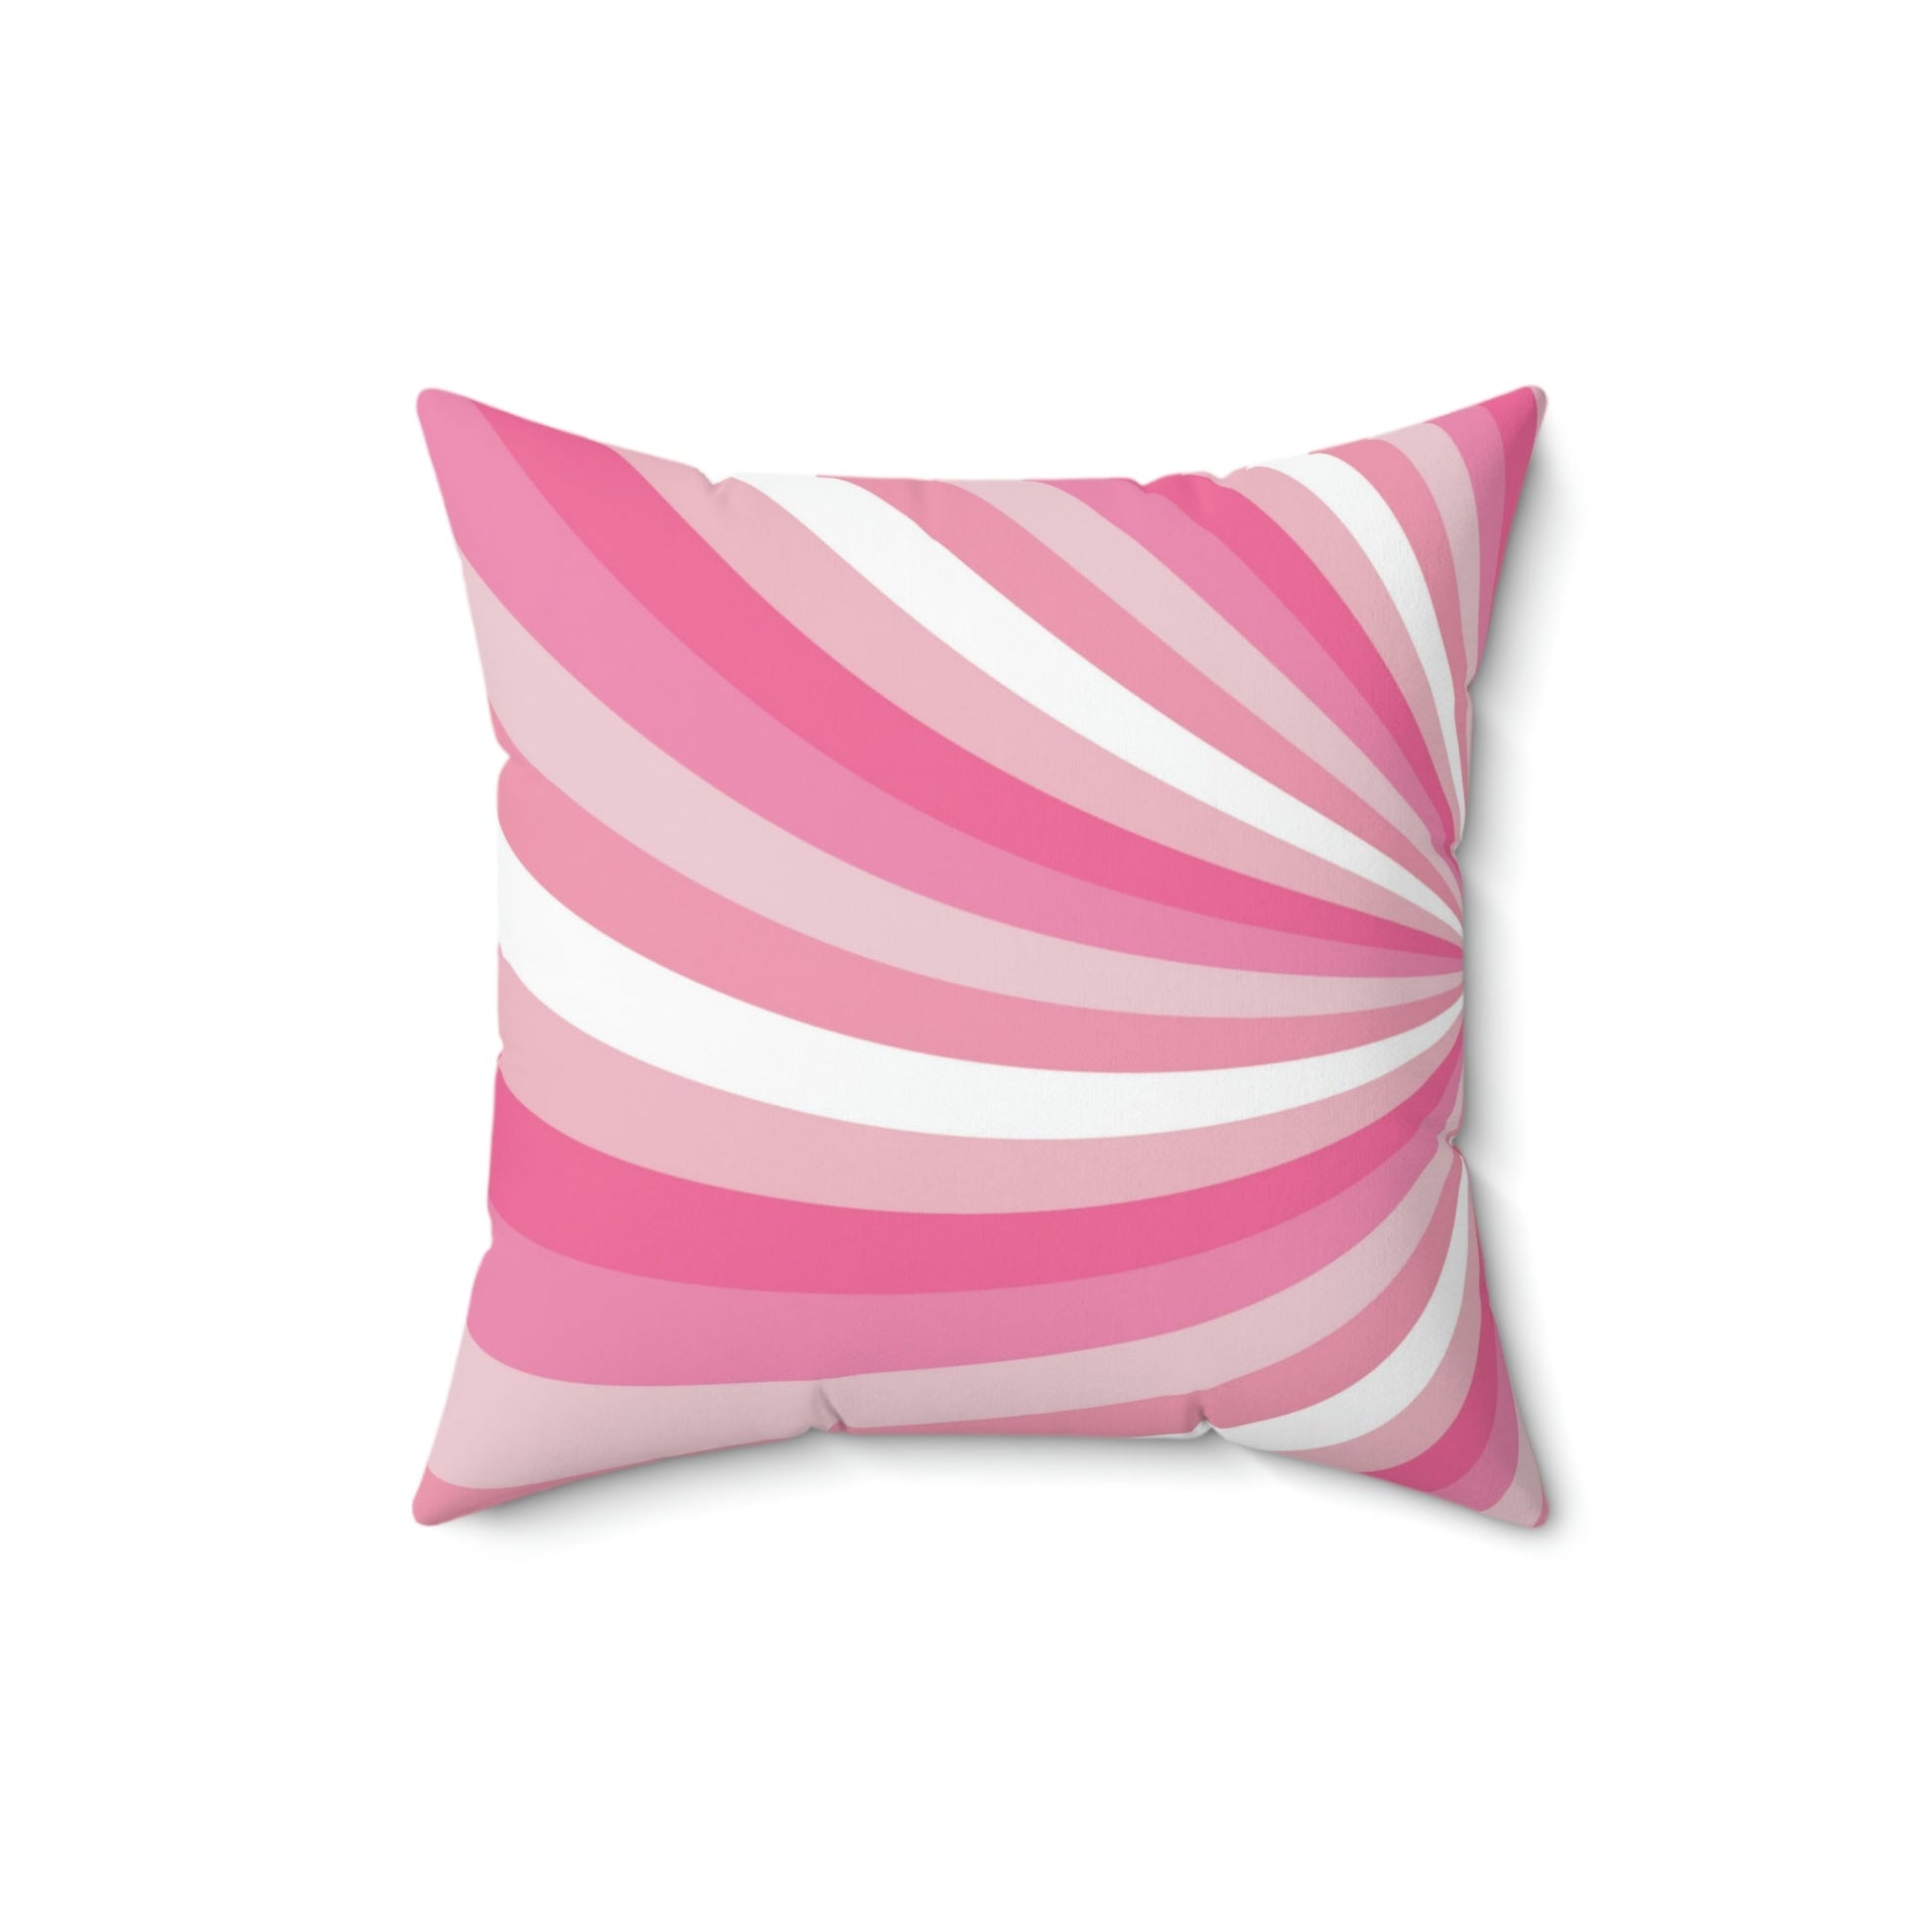 Pink Strawberry Swirl Square Pillow Home Decor Pink Sweetheart